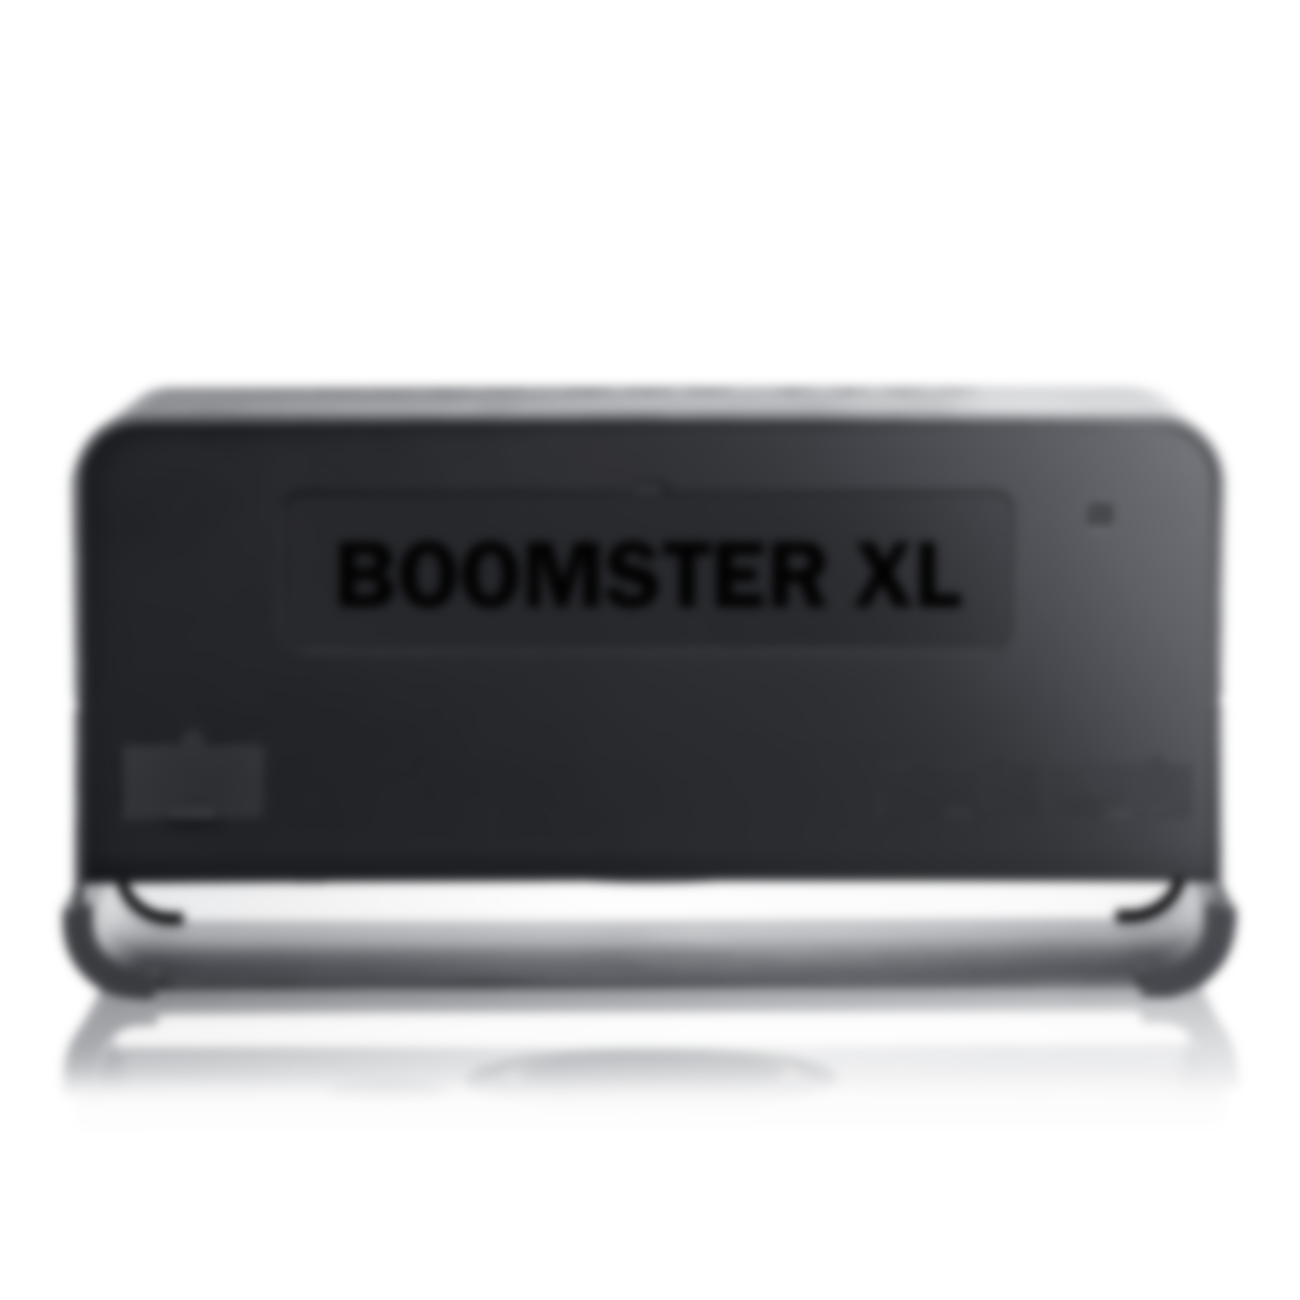 BOOMSTER XL